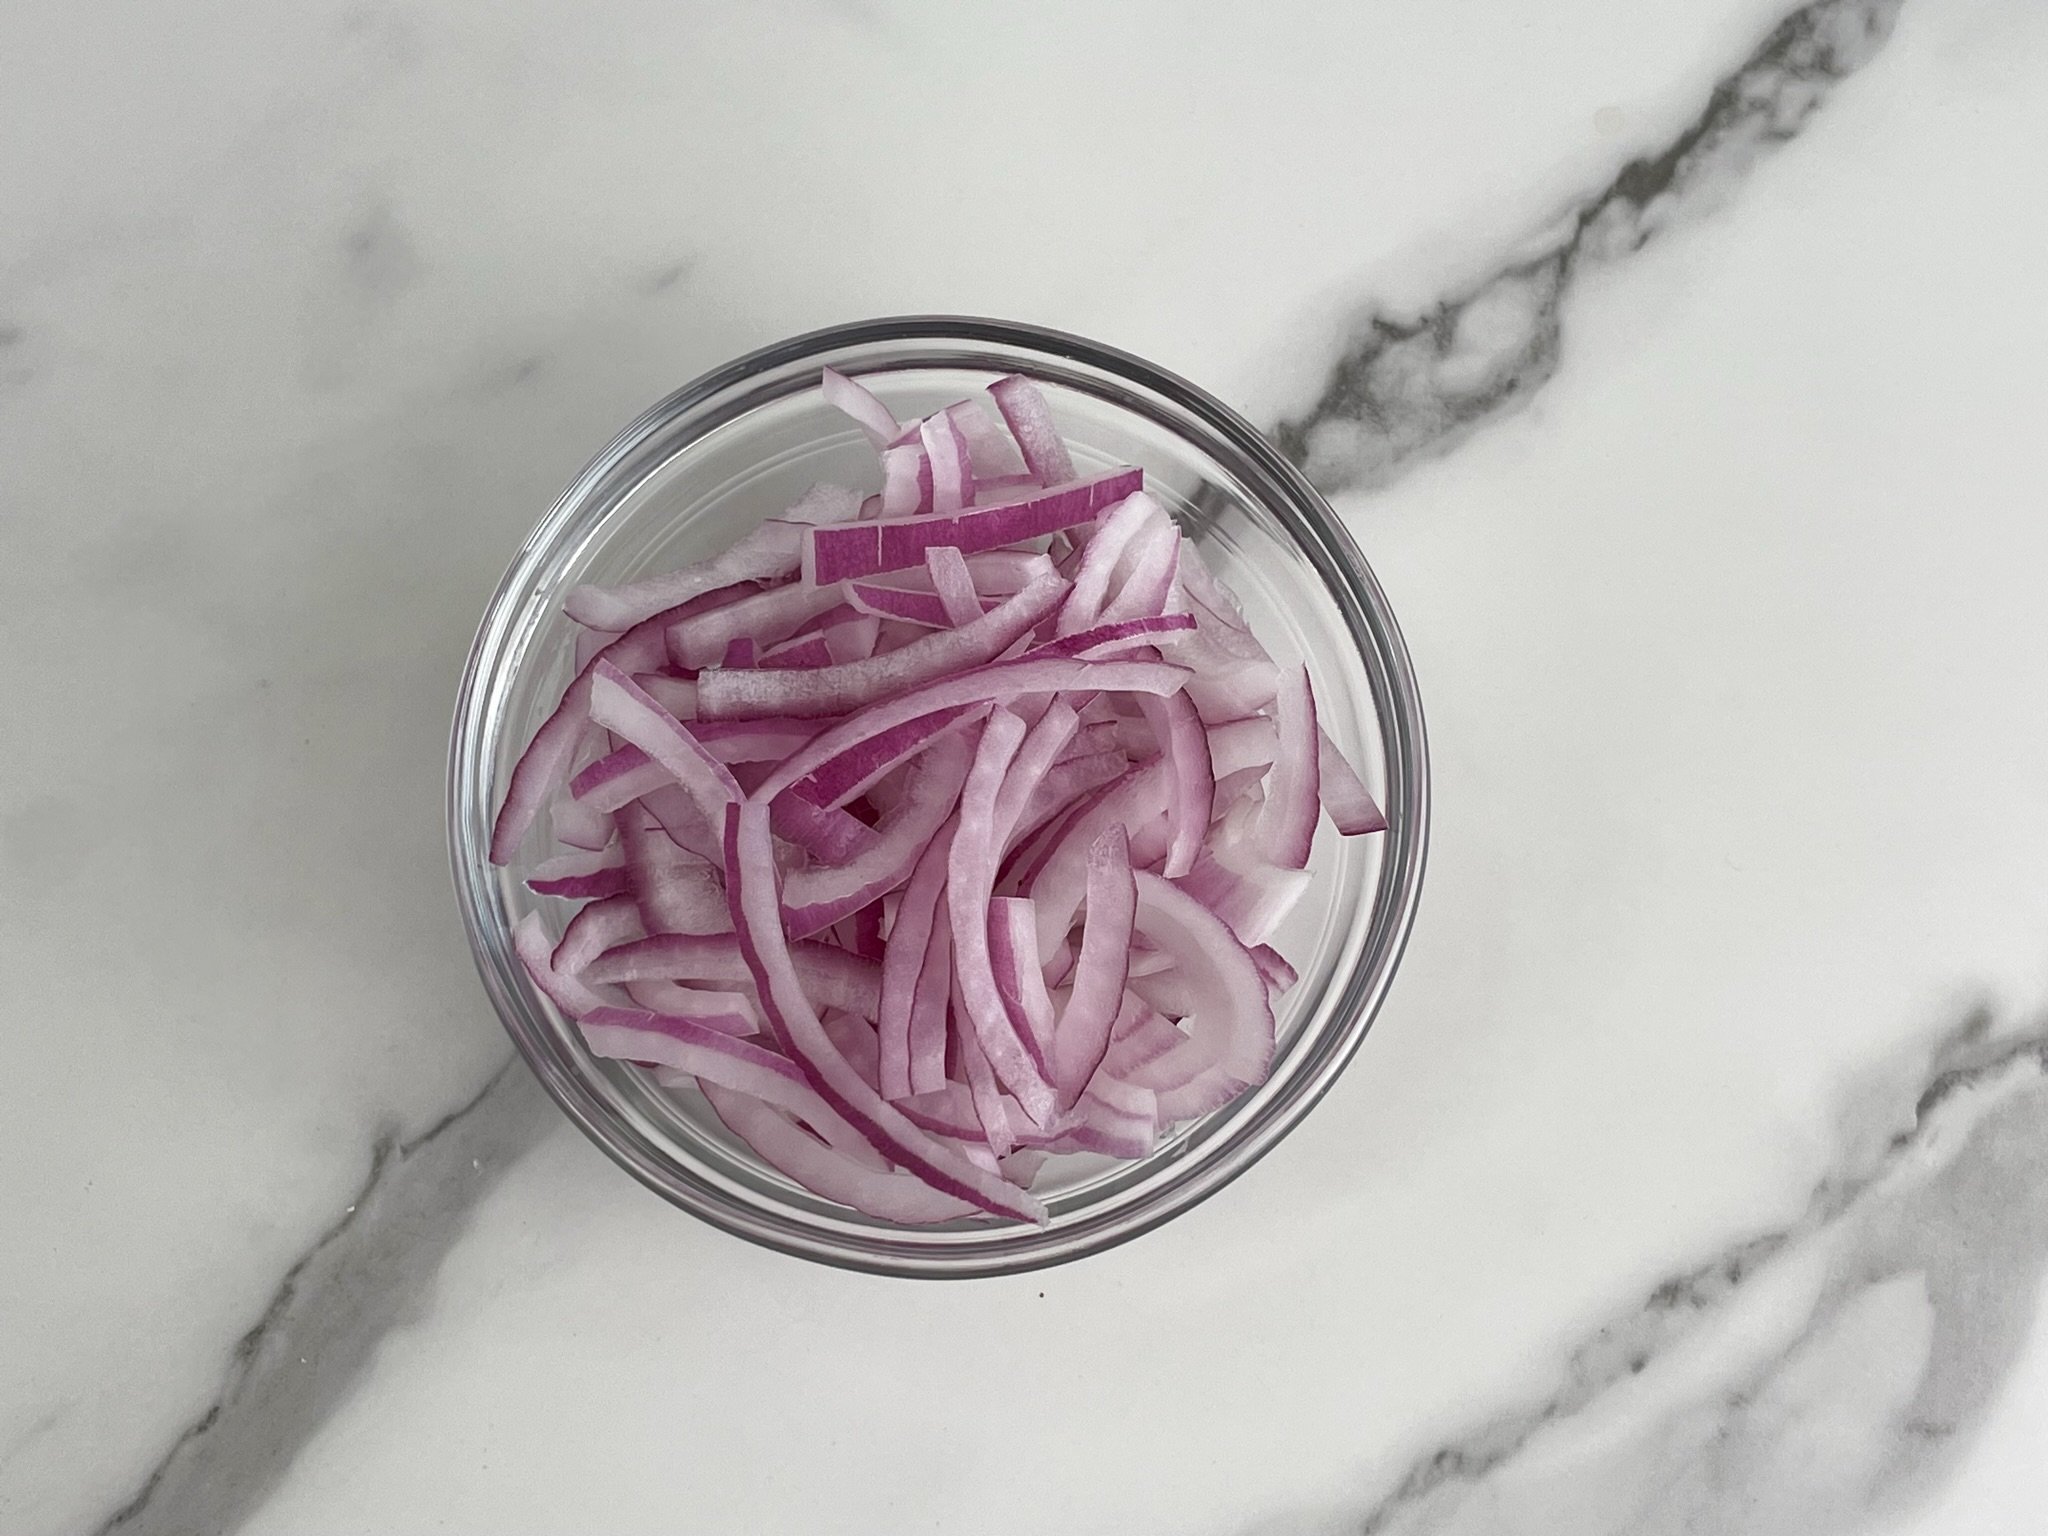 Or sliced red onions.